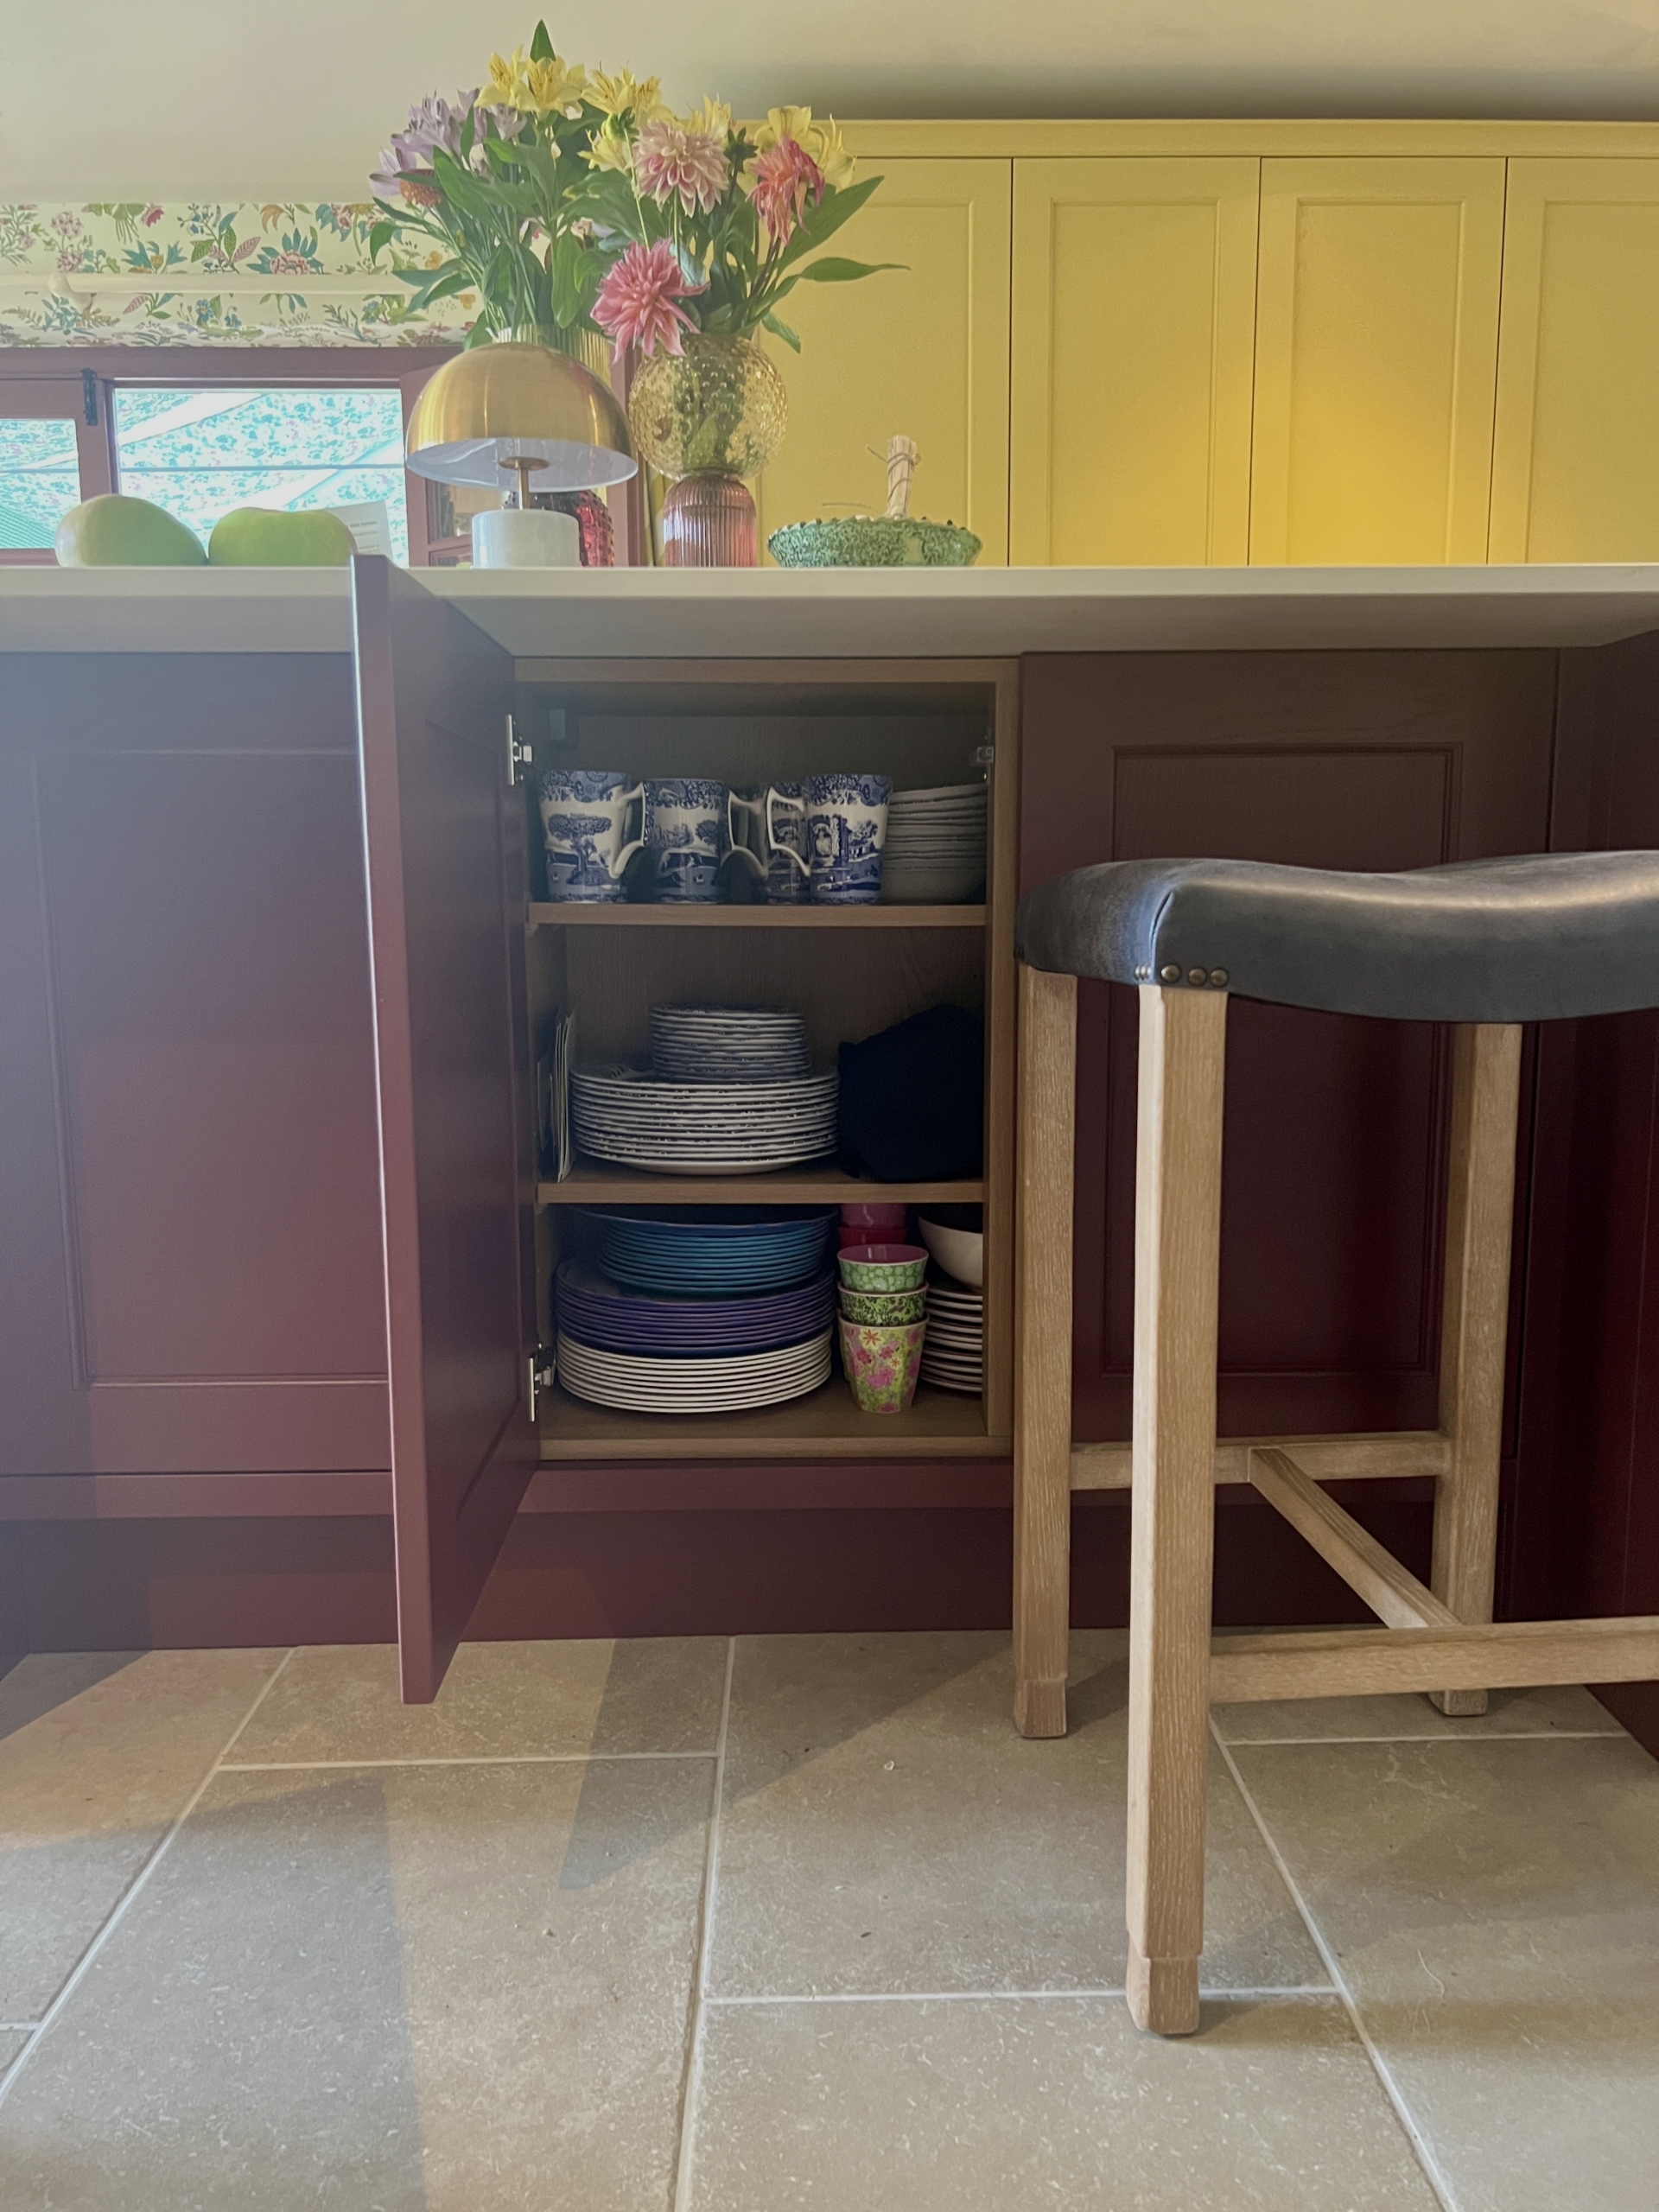 Open cupboard door in the kitchen island, displaying plate and mug storage within. Next to the open cupboard is a bar stool with wooden legs and dark leather seat.